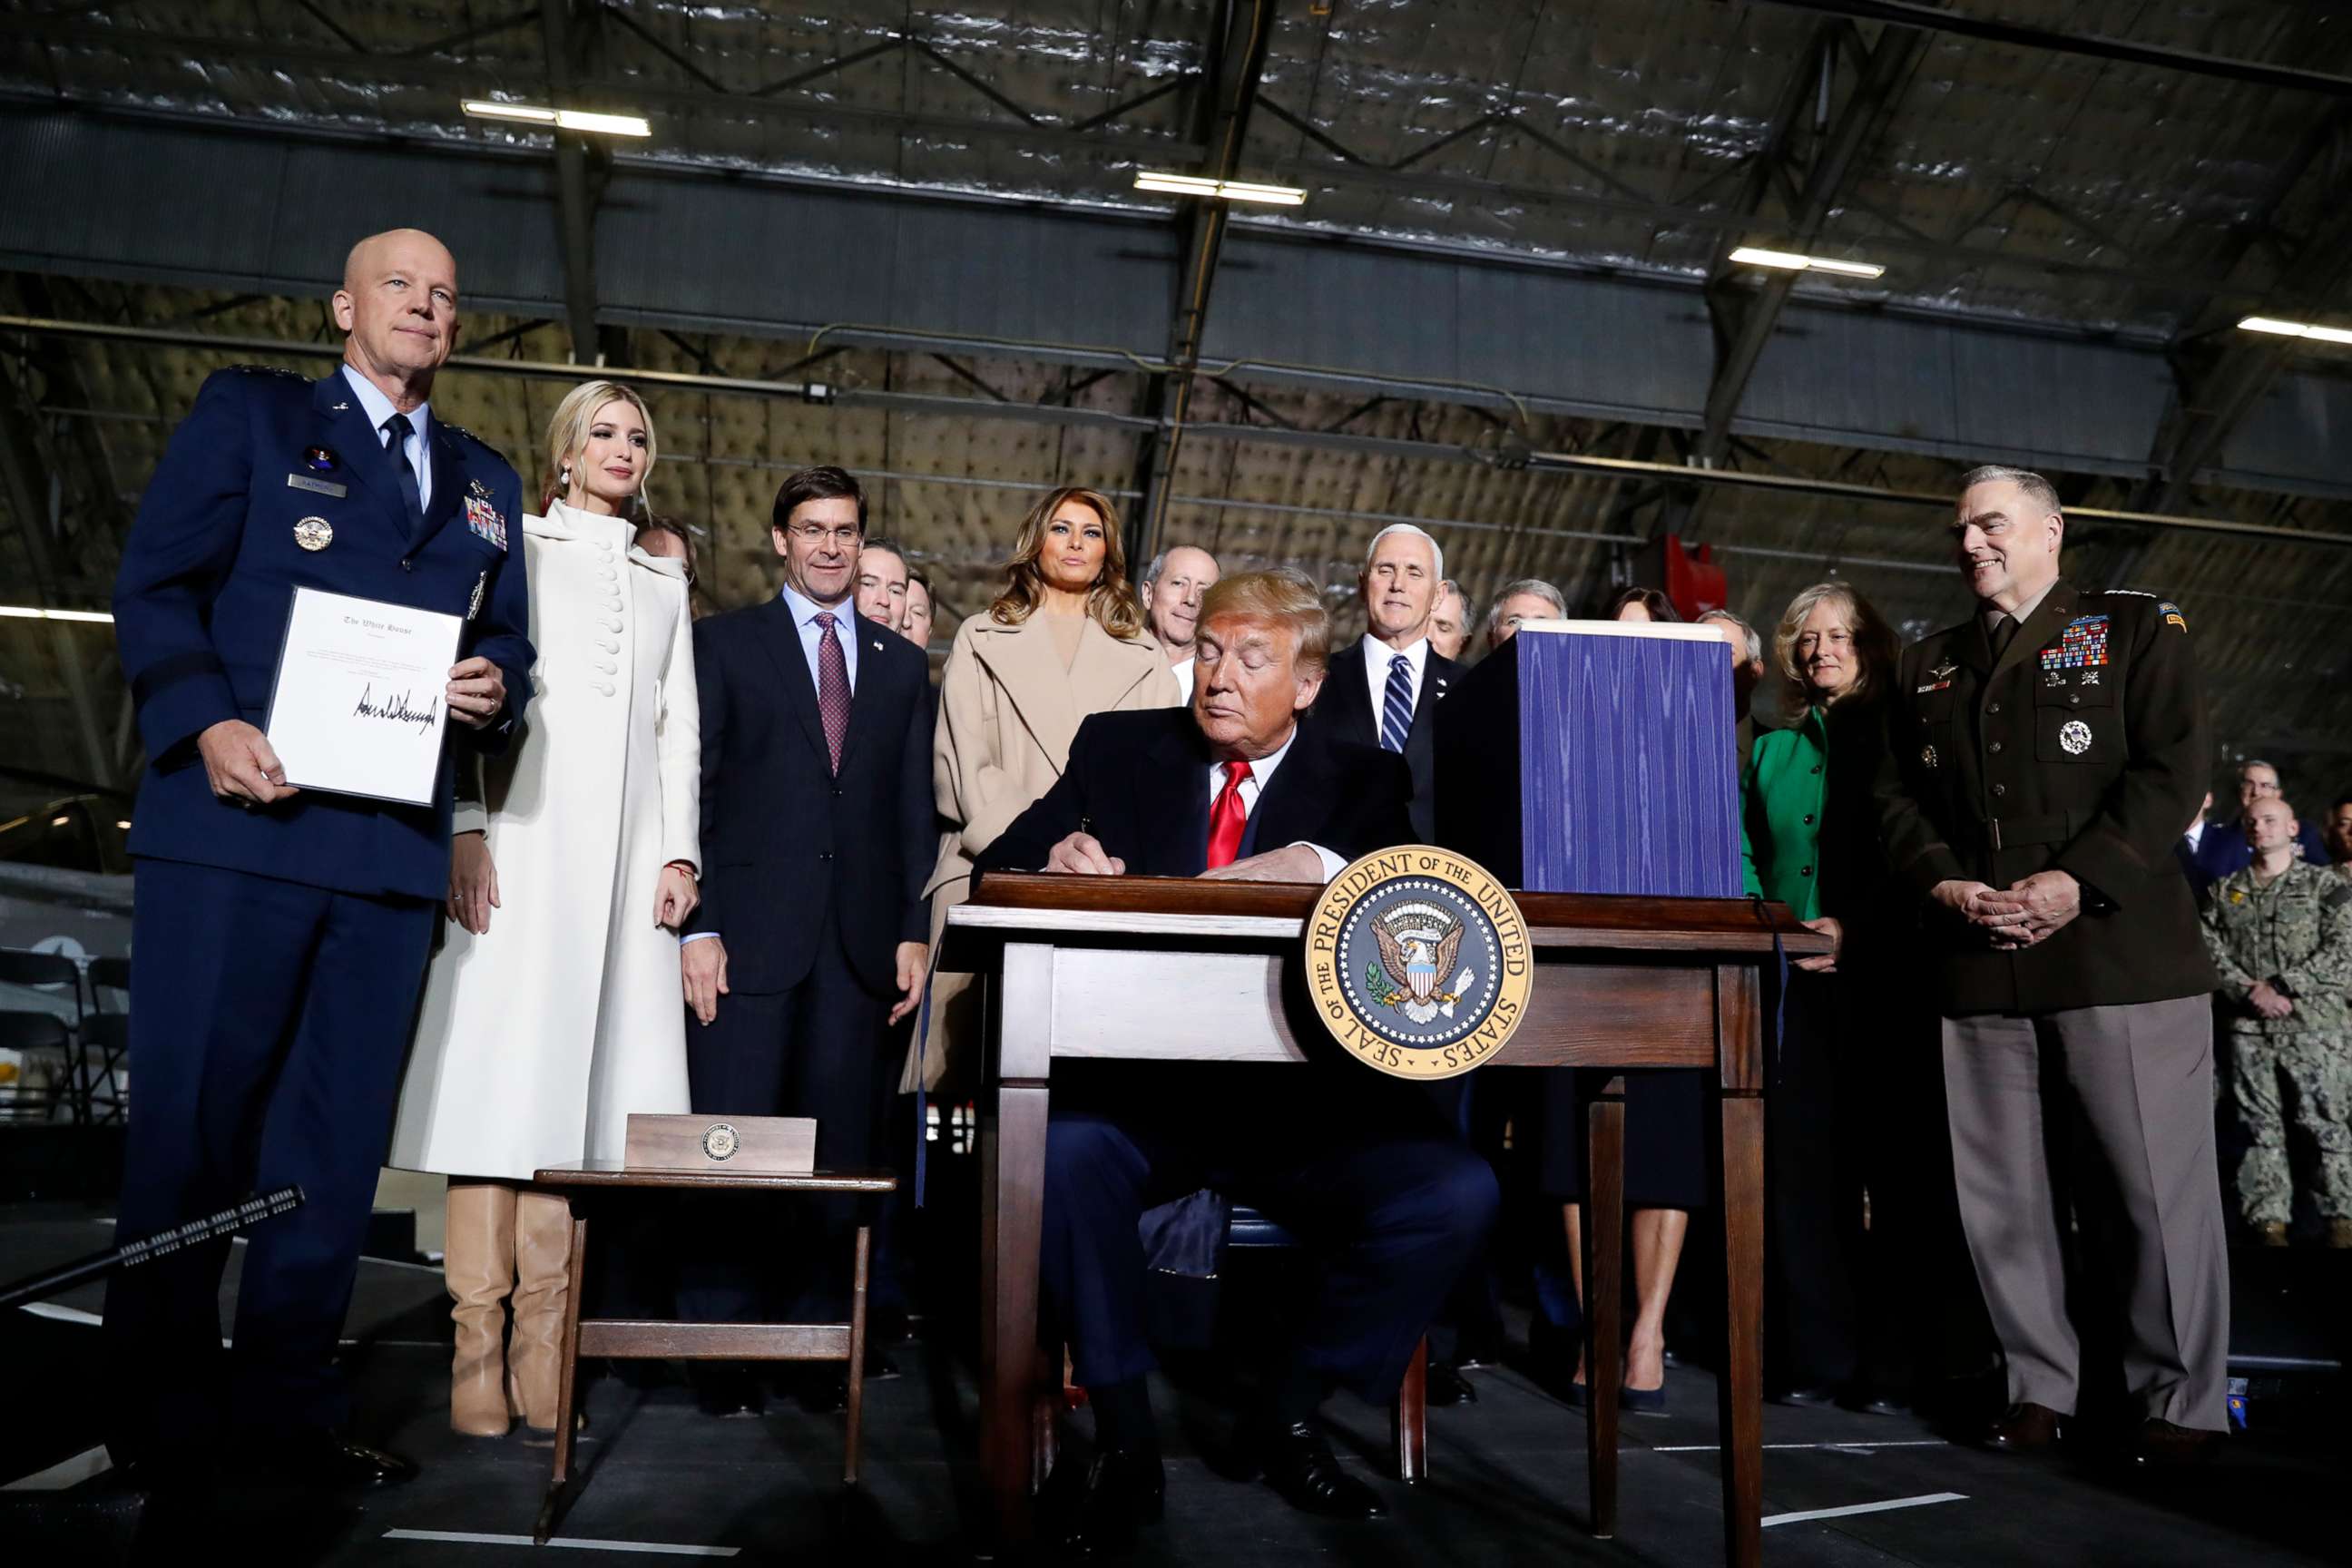 PHOTO: President Donald Trump signs the National Defense Authorization Act for Fiscal Year 2020 at Andrews Air Force Base, Md., Dec. 20, 2019.